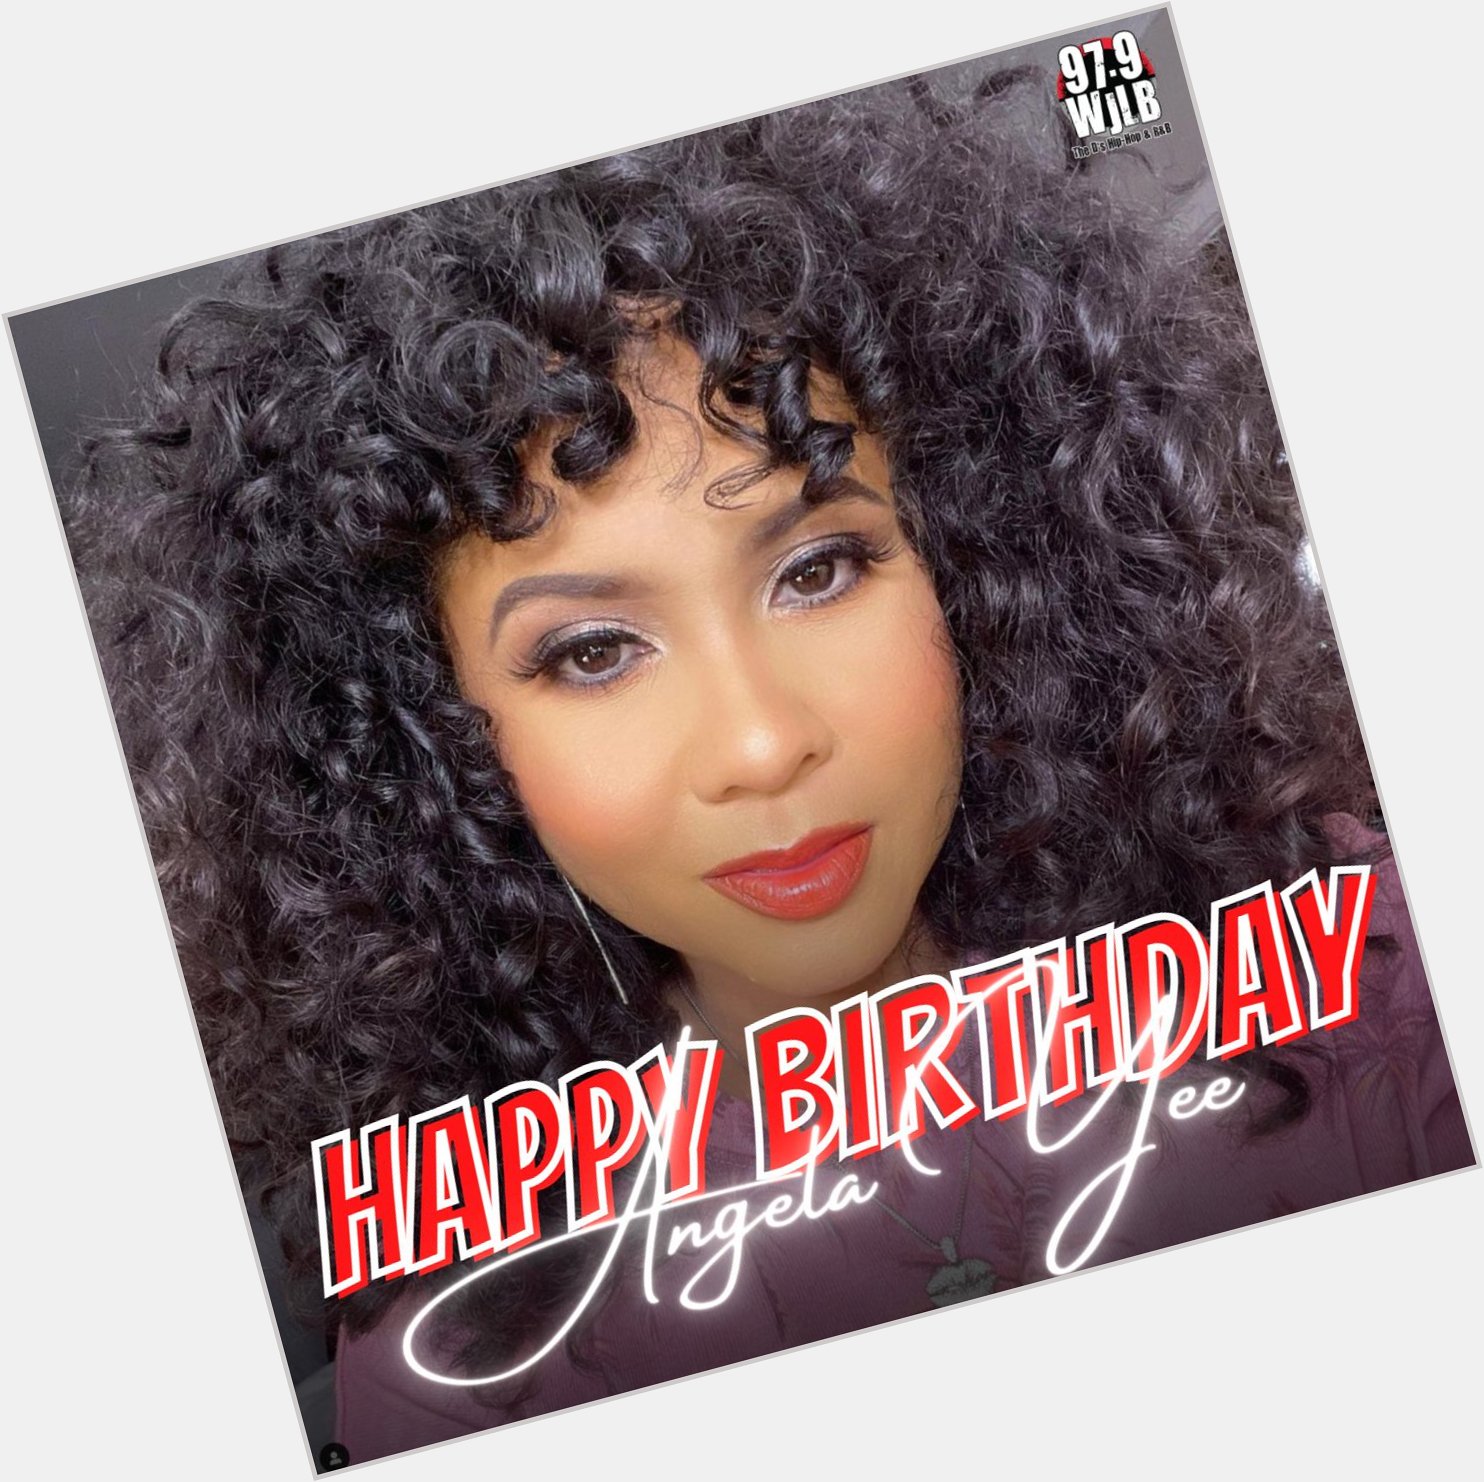 Happy Birthday to our own Angela Yee! 